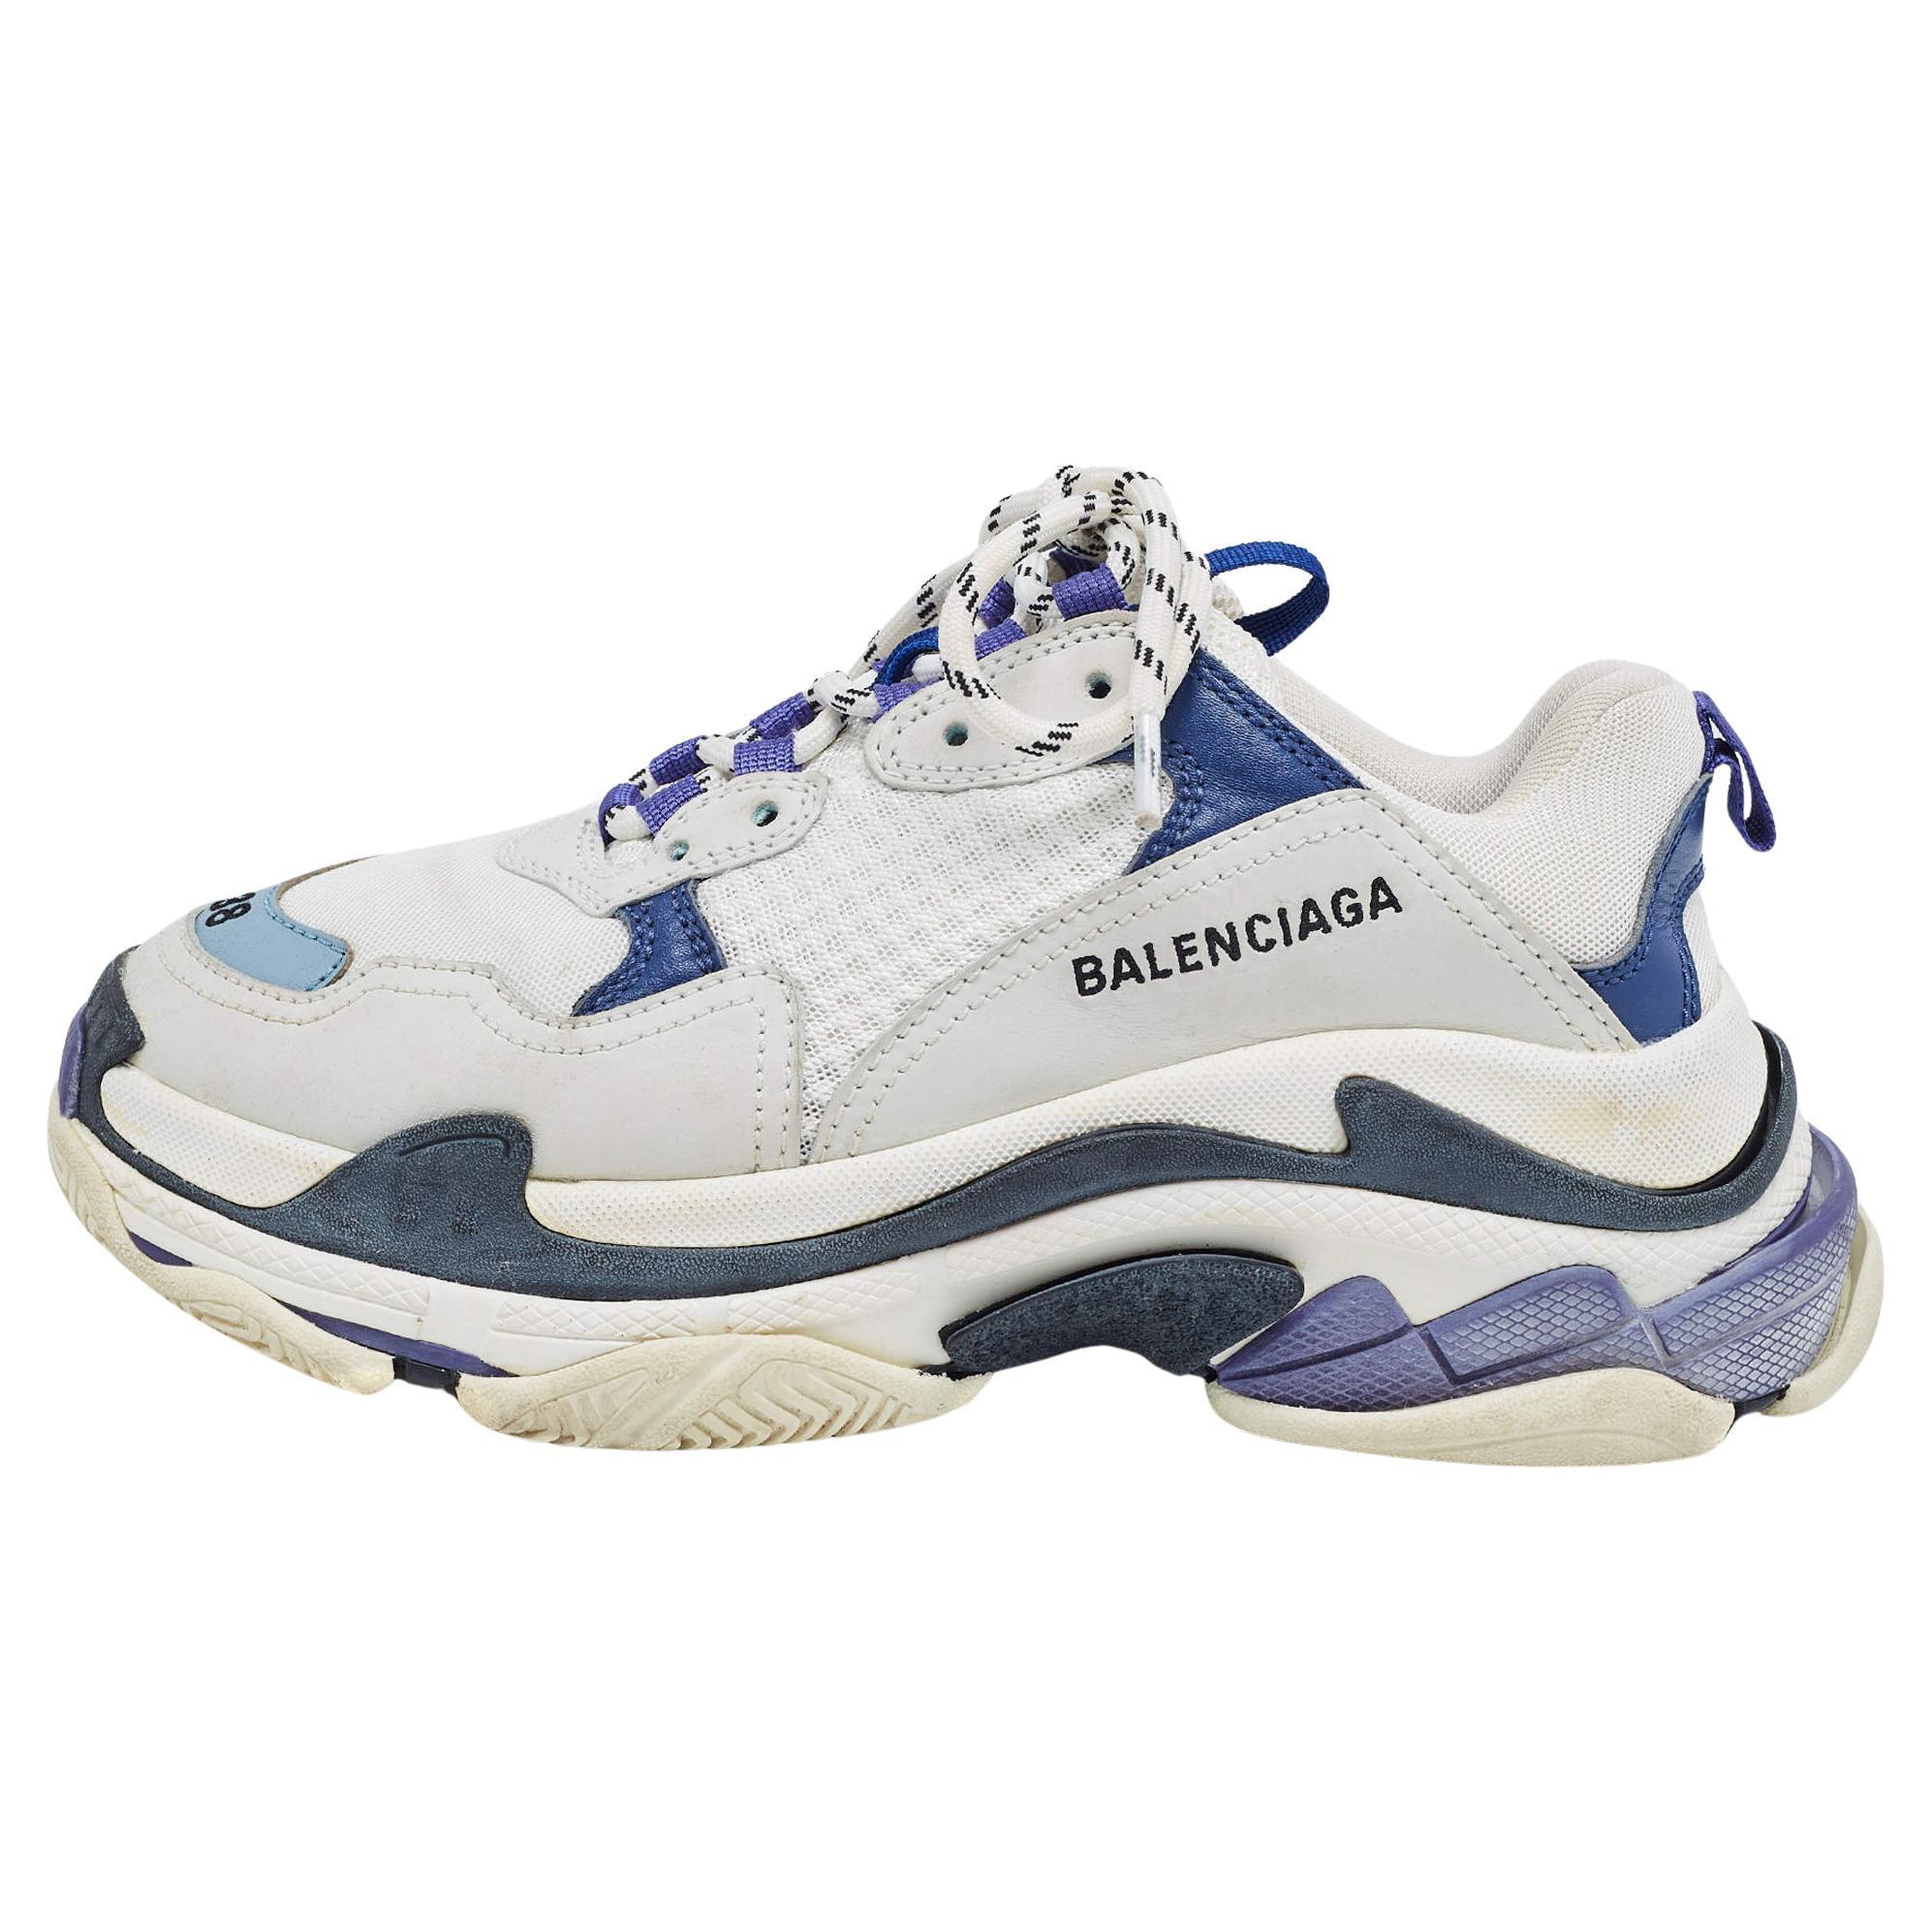 Balenciaga White/Blue Nubuck Leather and Mesh Triple S Sneakers Size 38 For Sale